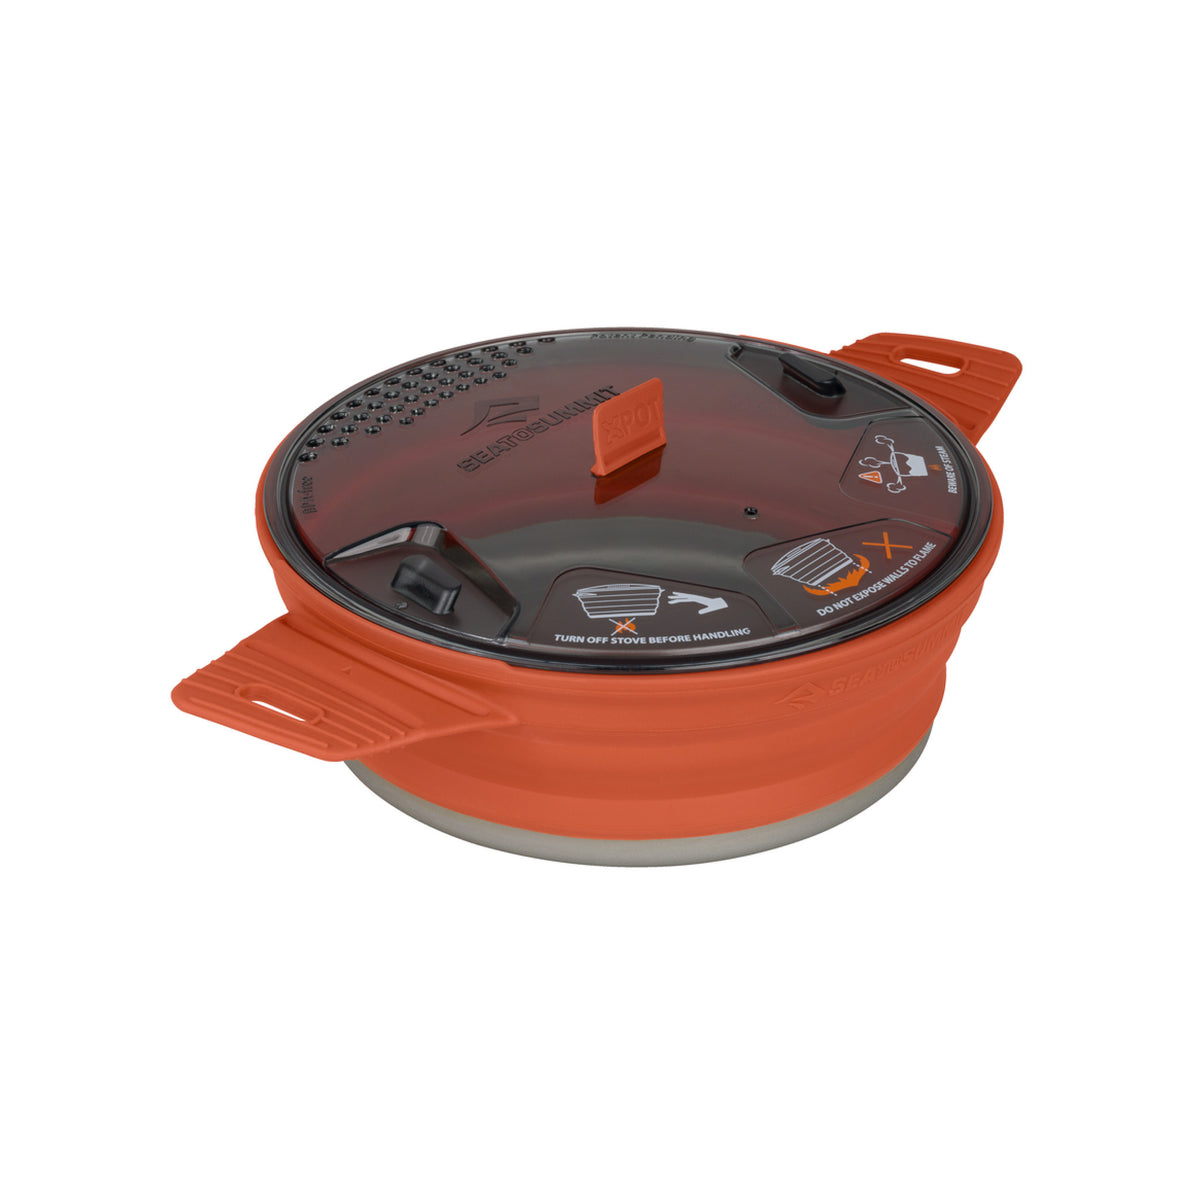 Sea to Summit Collapsible Cookware & Dinnerware